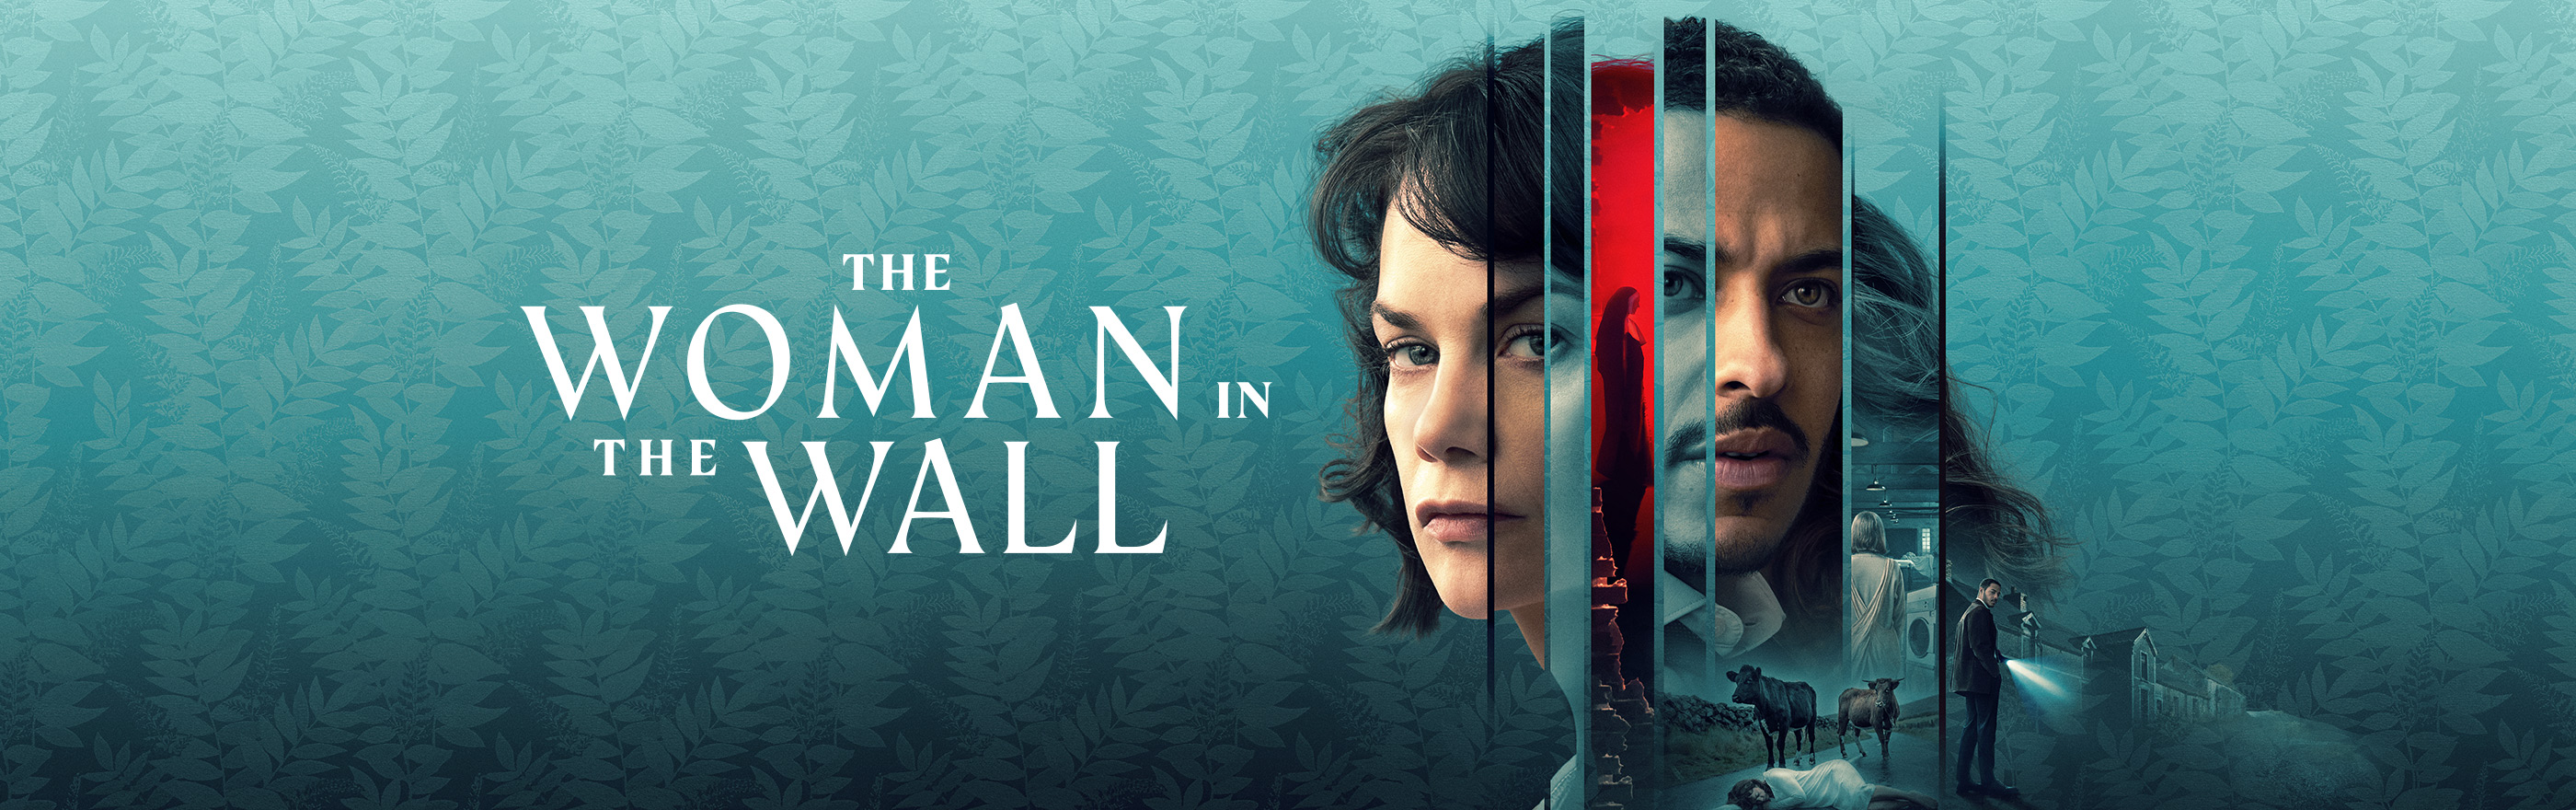 The Woman in the Wall LOGO